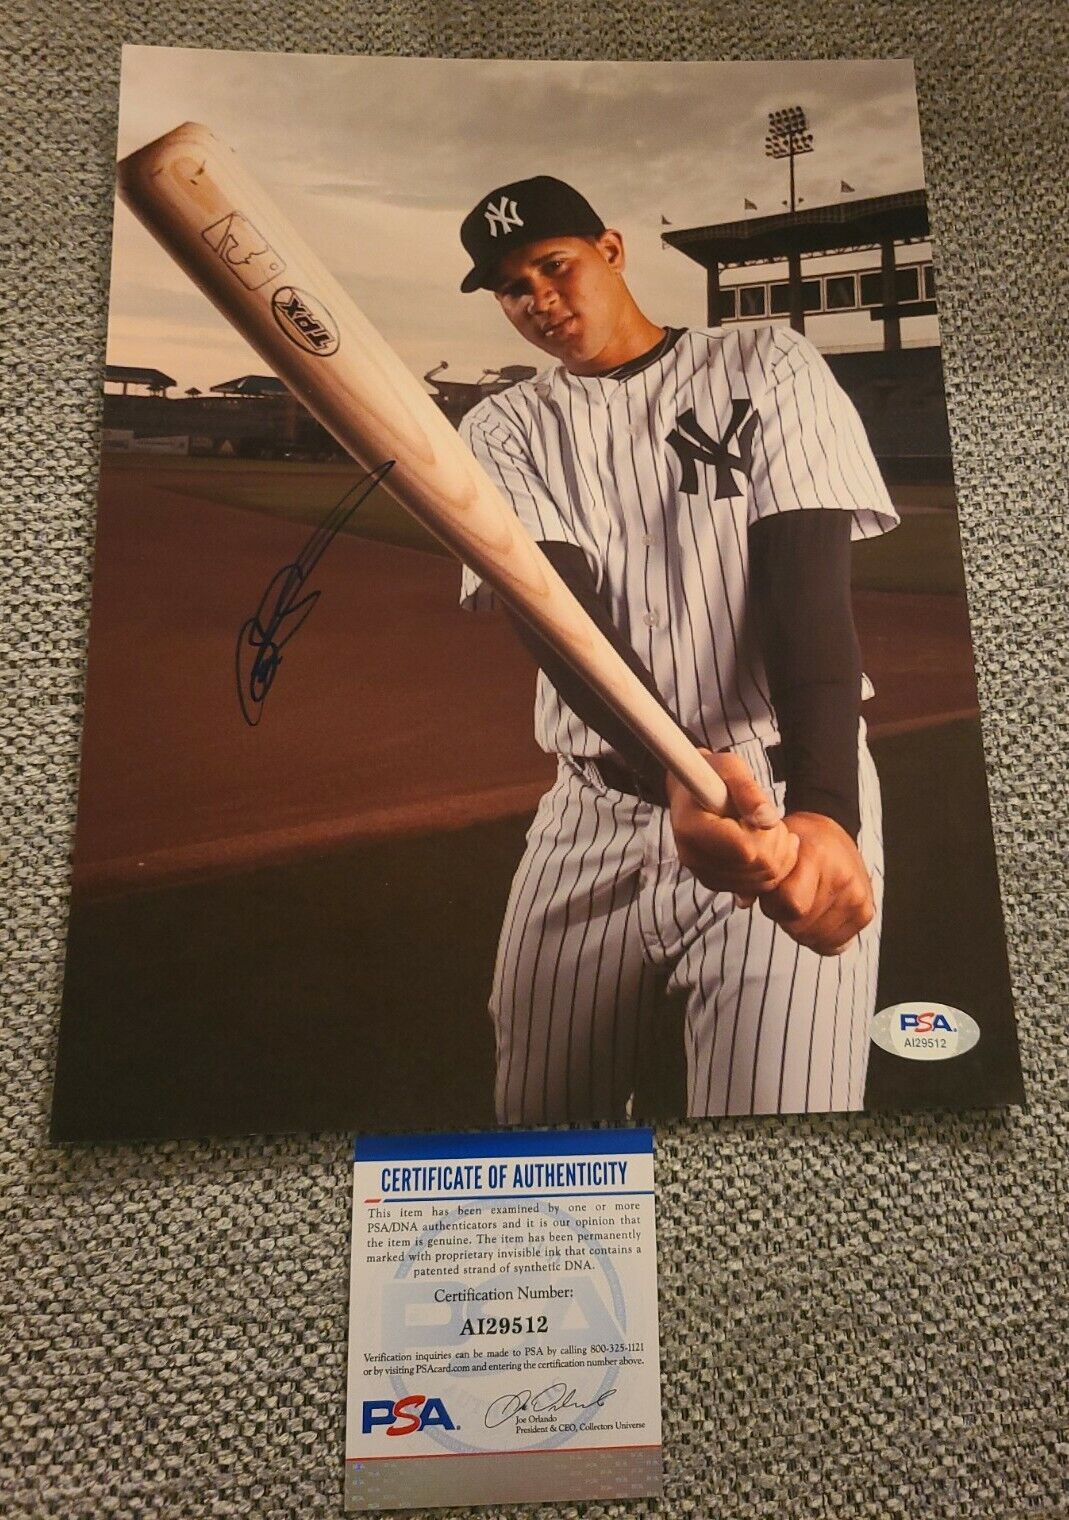 GARY SANCHEZ SIGNED 8X10 PHOTO NEW YORK YANKEES PSA/DNA AUTHENTICATED #AI29512